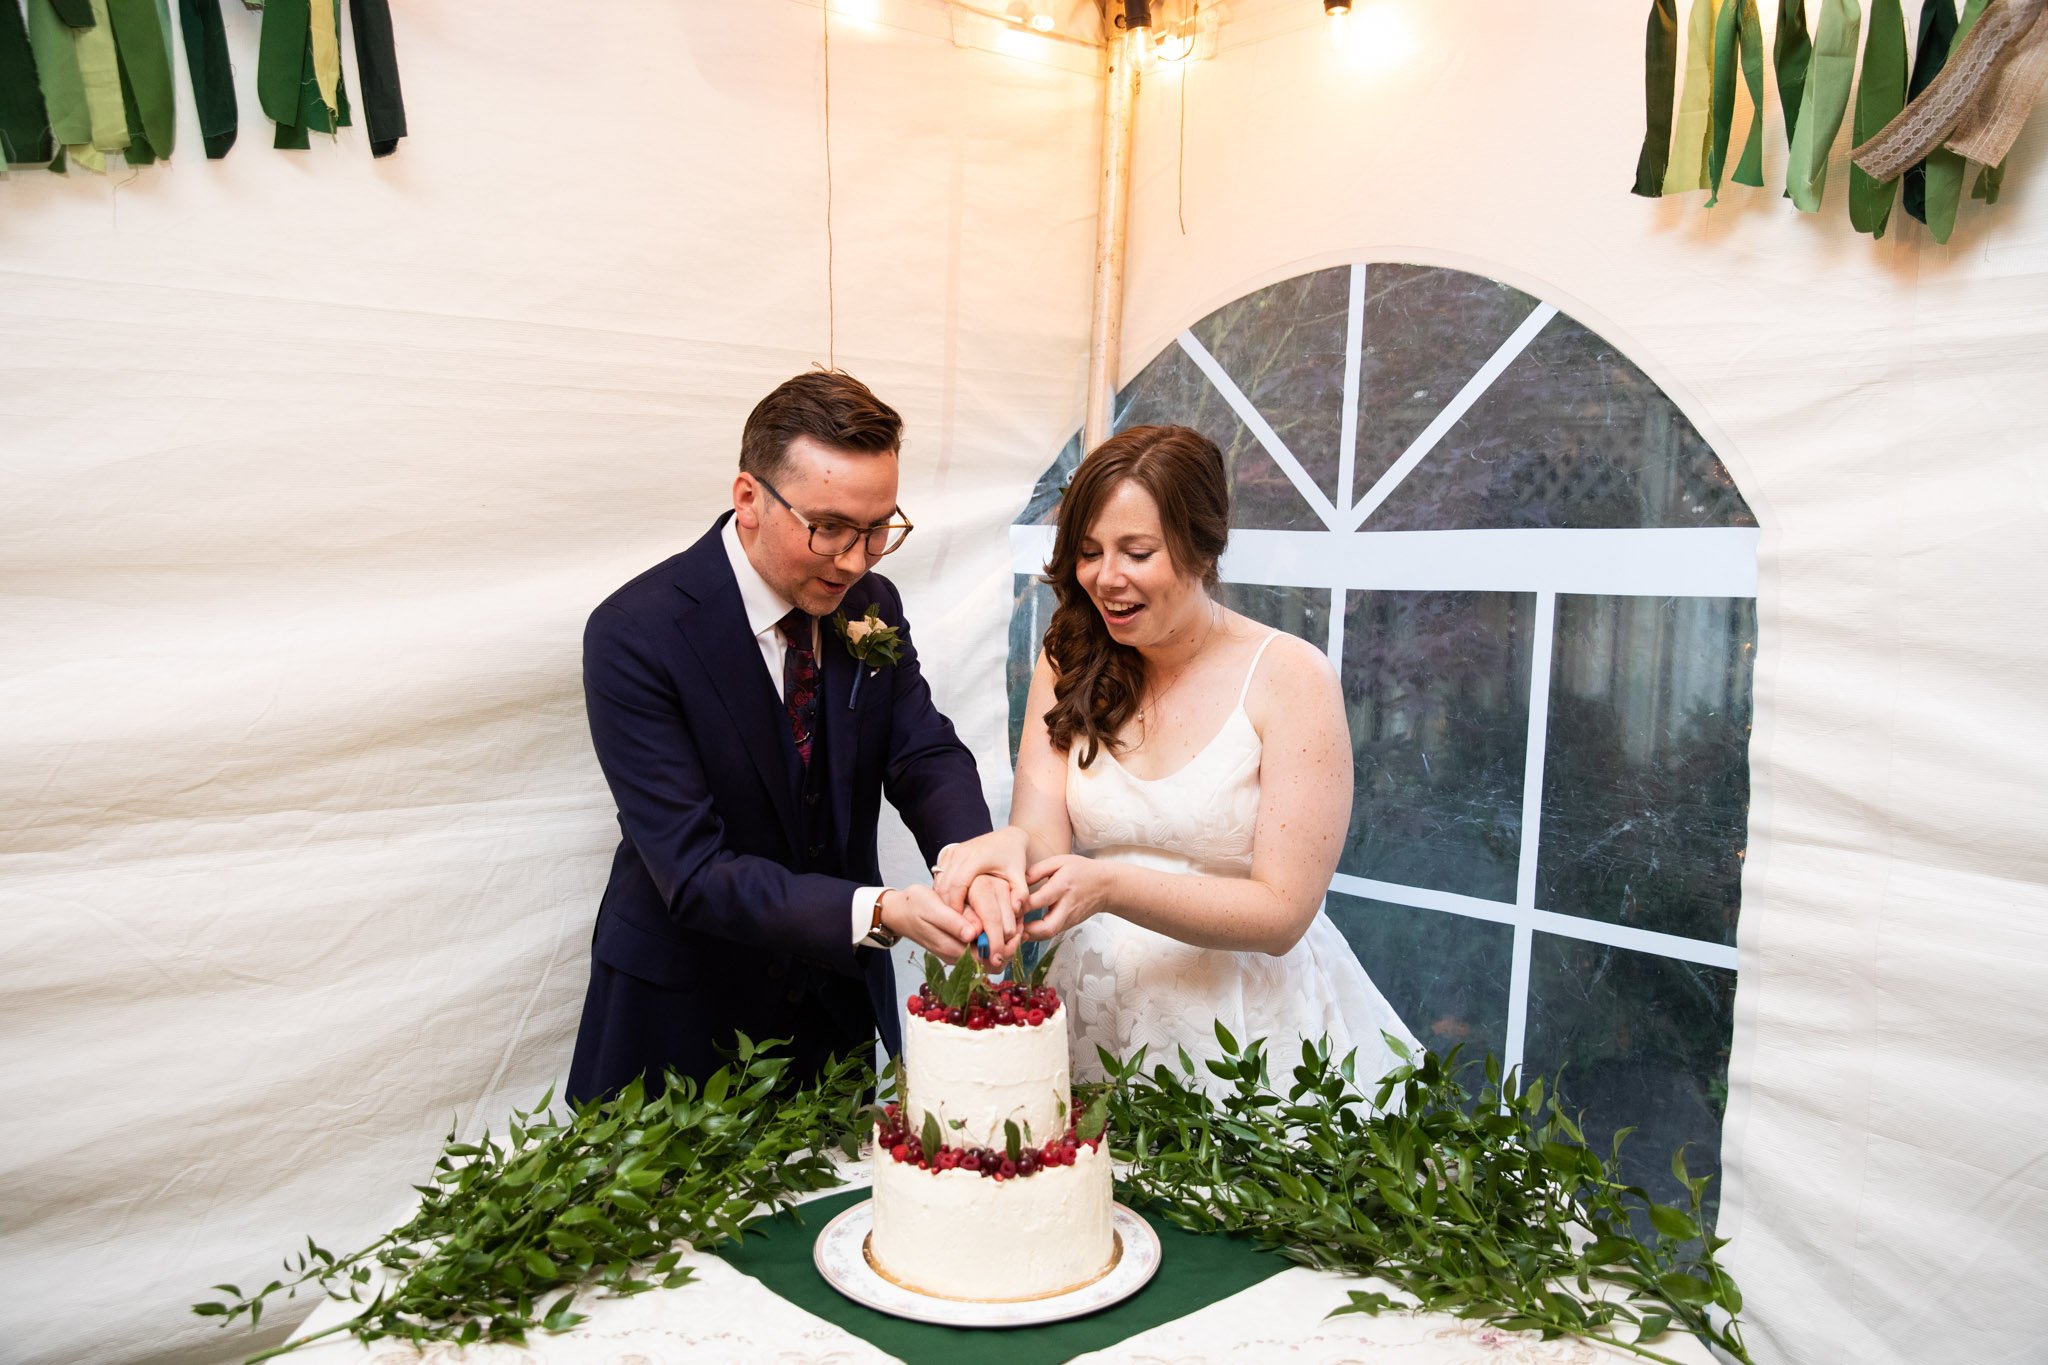 cake cutting with couple behind the cake.jpg